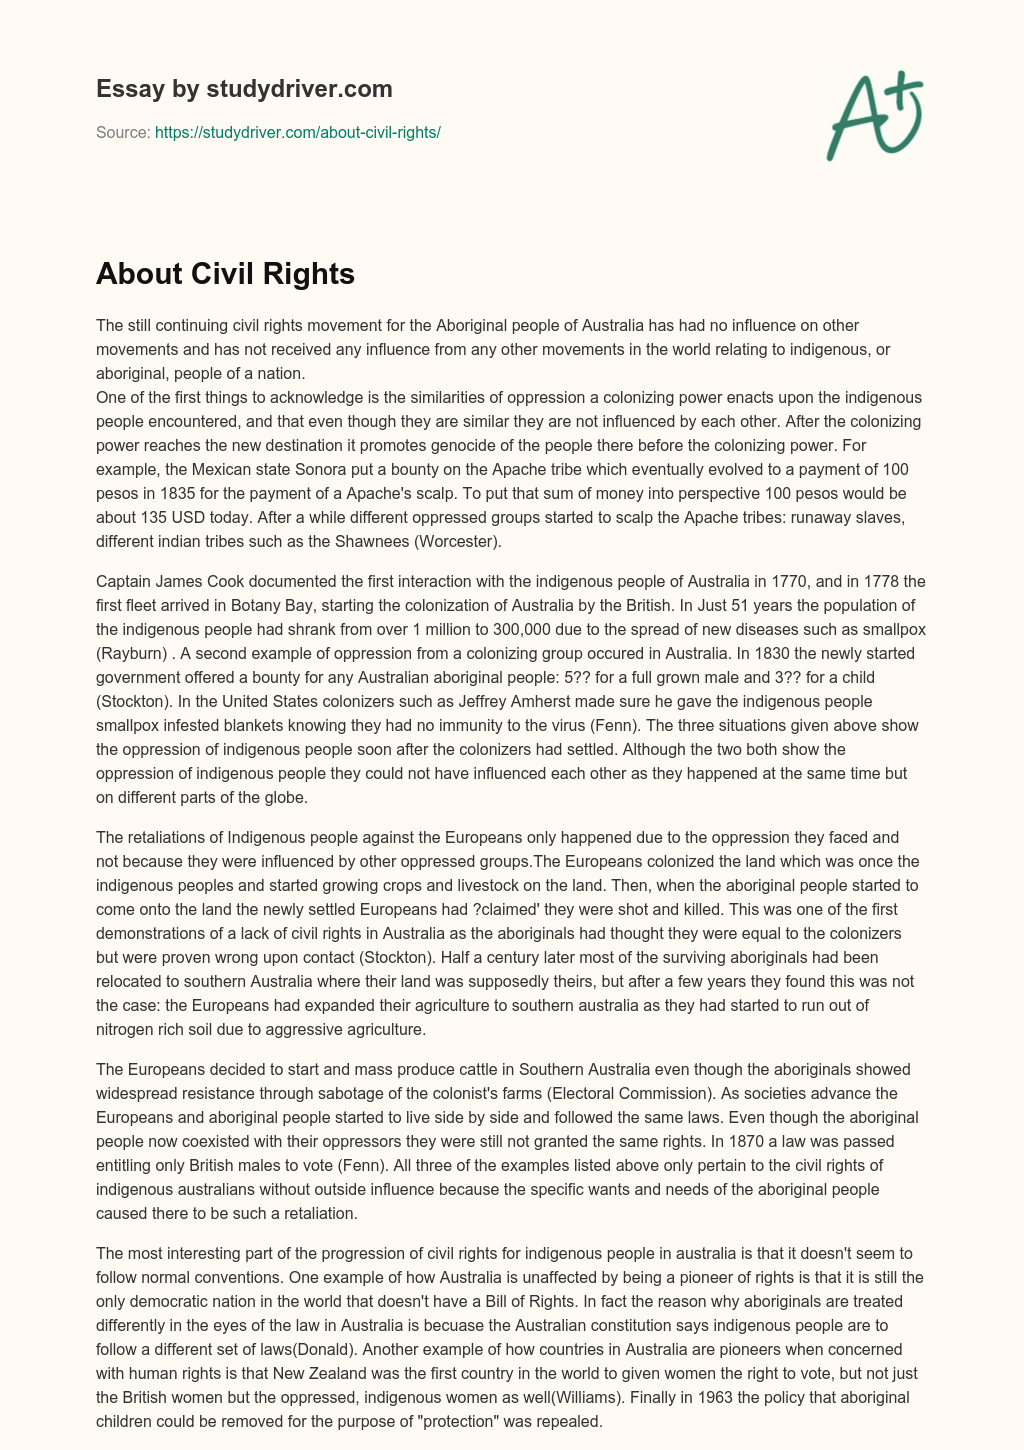 About Civil Rights essay